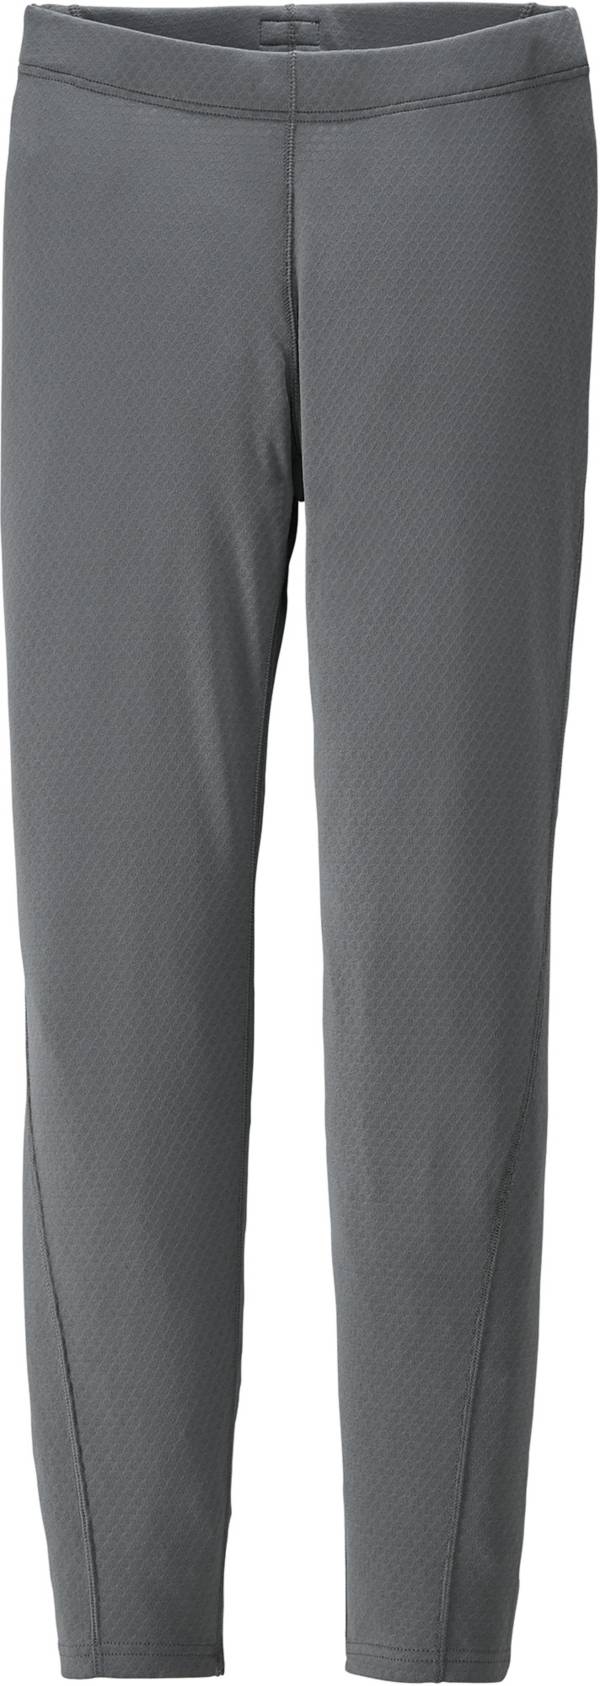 Patagonia Youth Capilene Midweight Bottoms product image